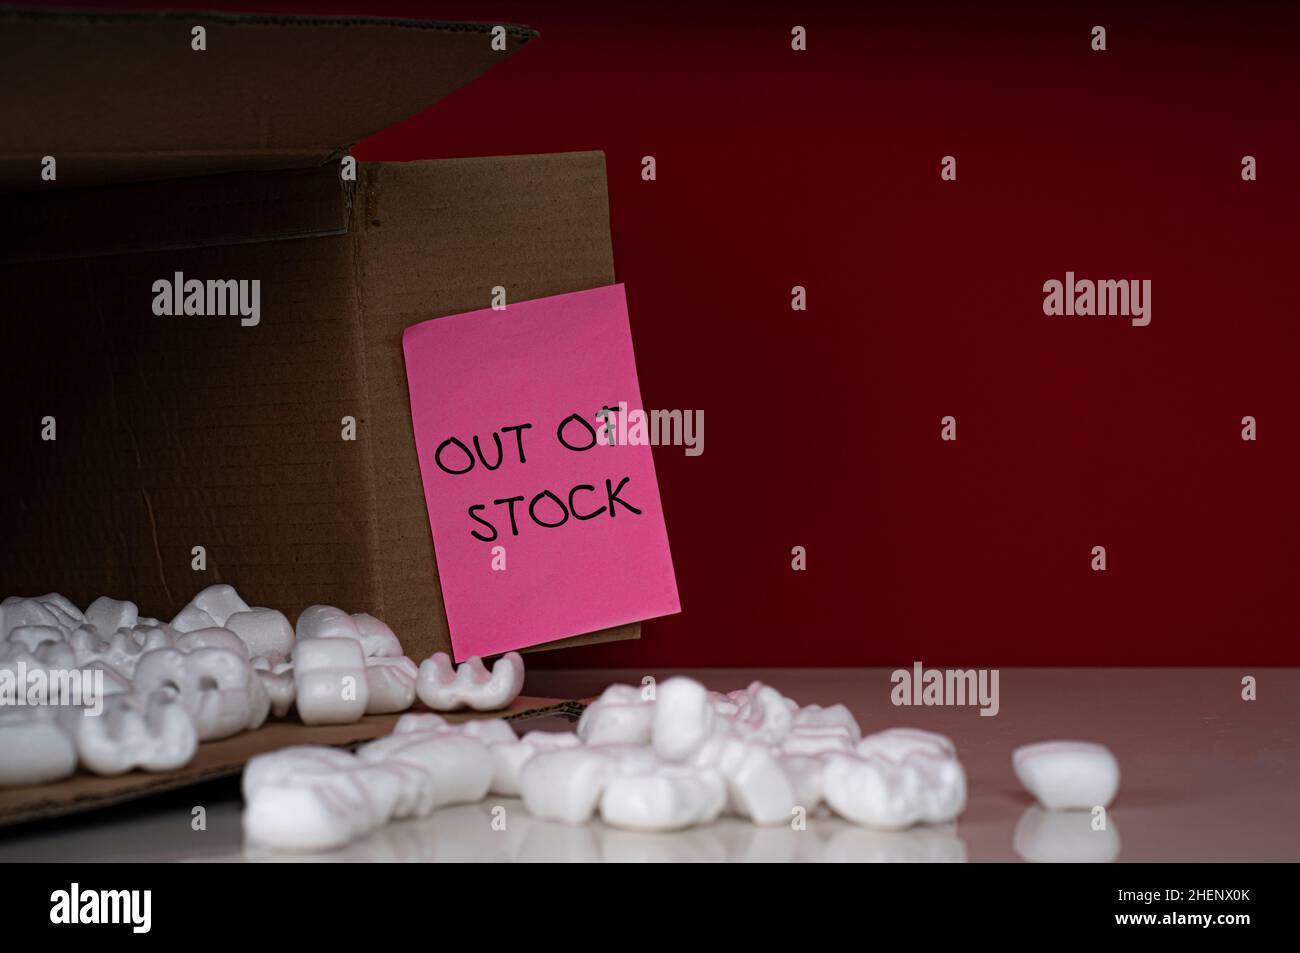 Business concept. Layout of packing peanuts, box and note with text OUT OF STOCK. Stock Photo